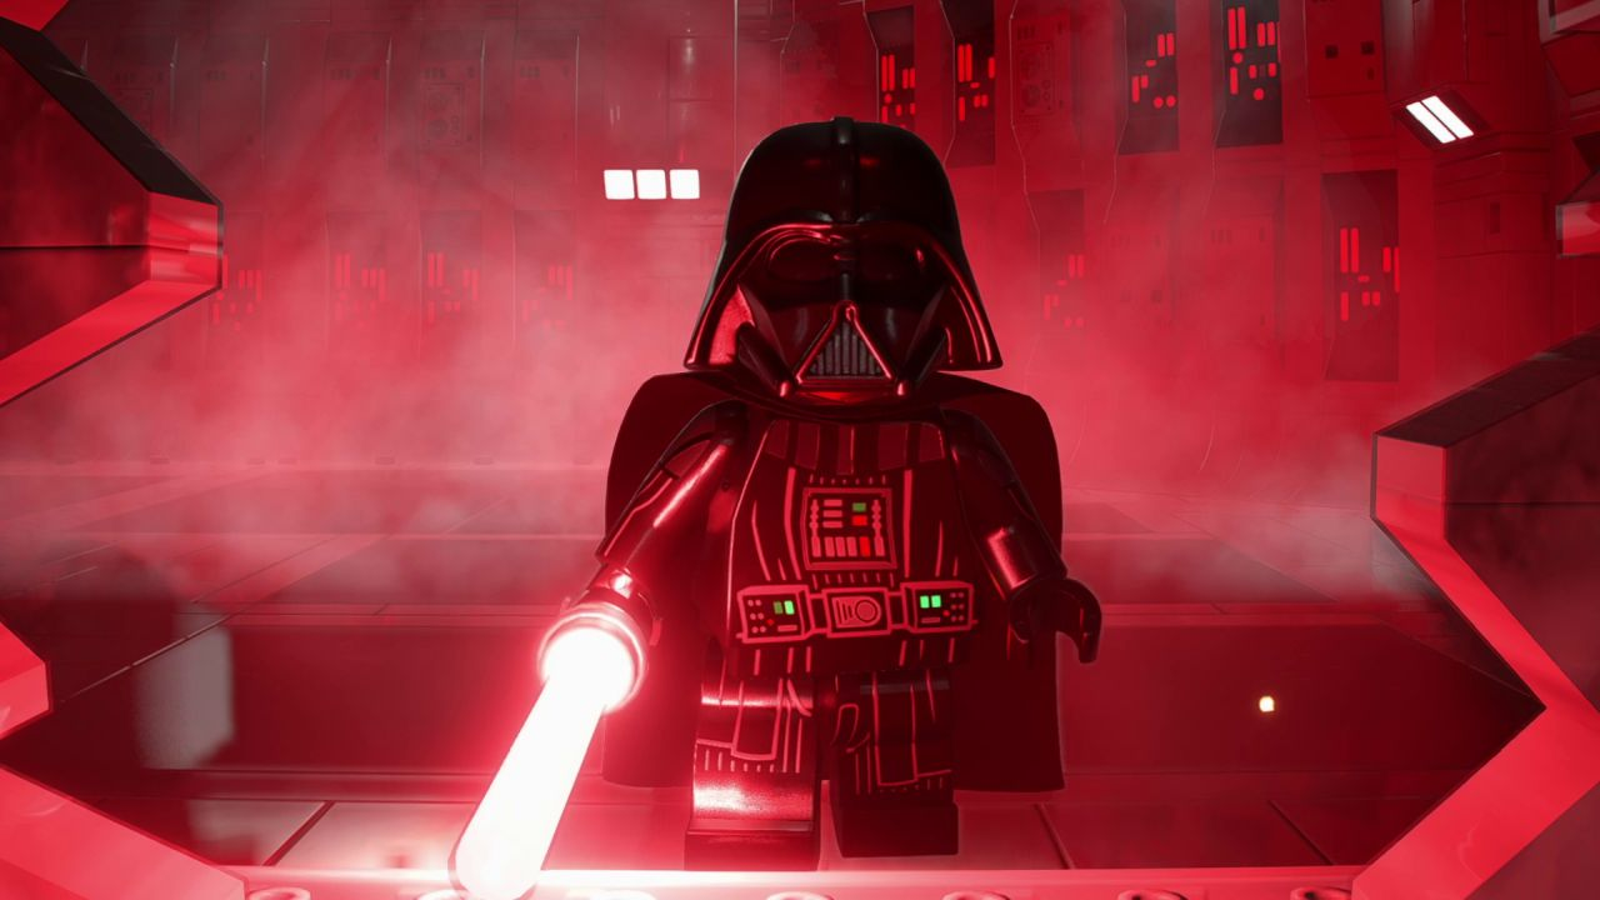 Buy LEGO Star Wars: The Skywalker Saga from the Humble Store